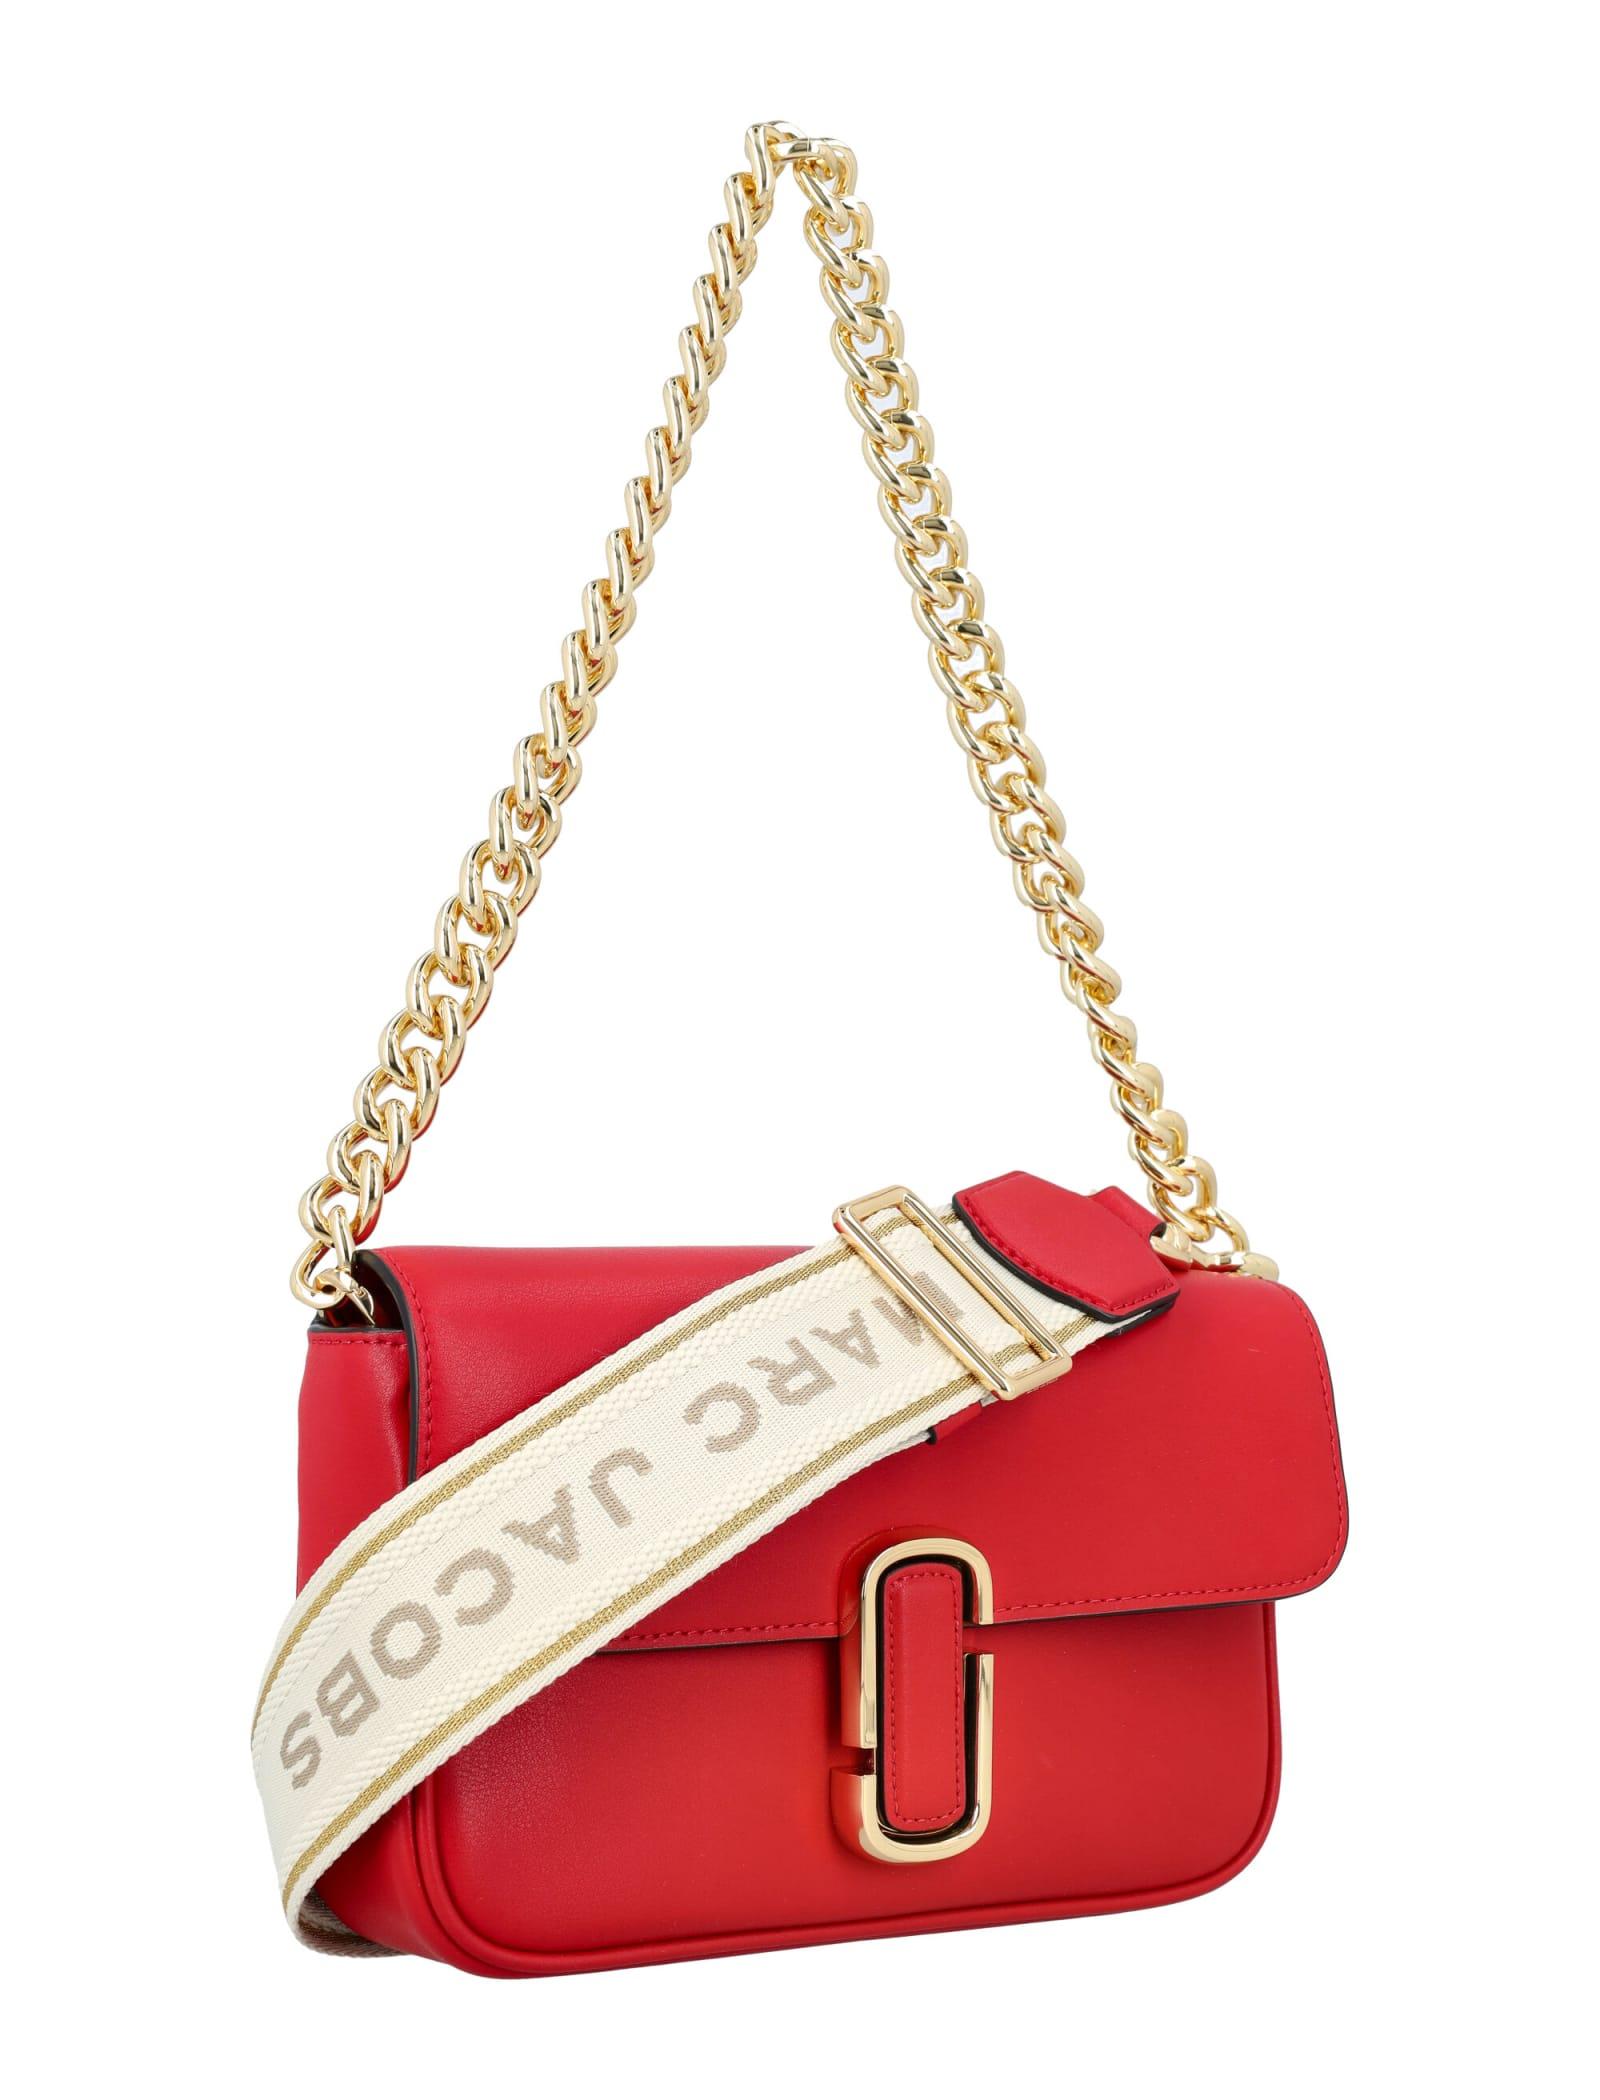 Marc Jacobs J Leather Bag in Red |